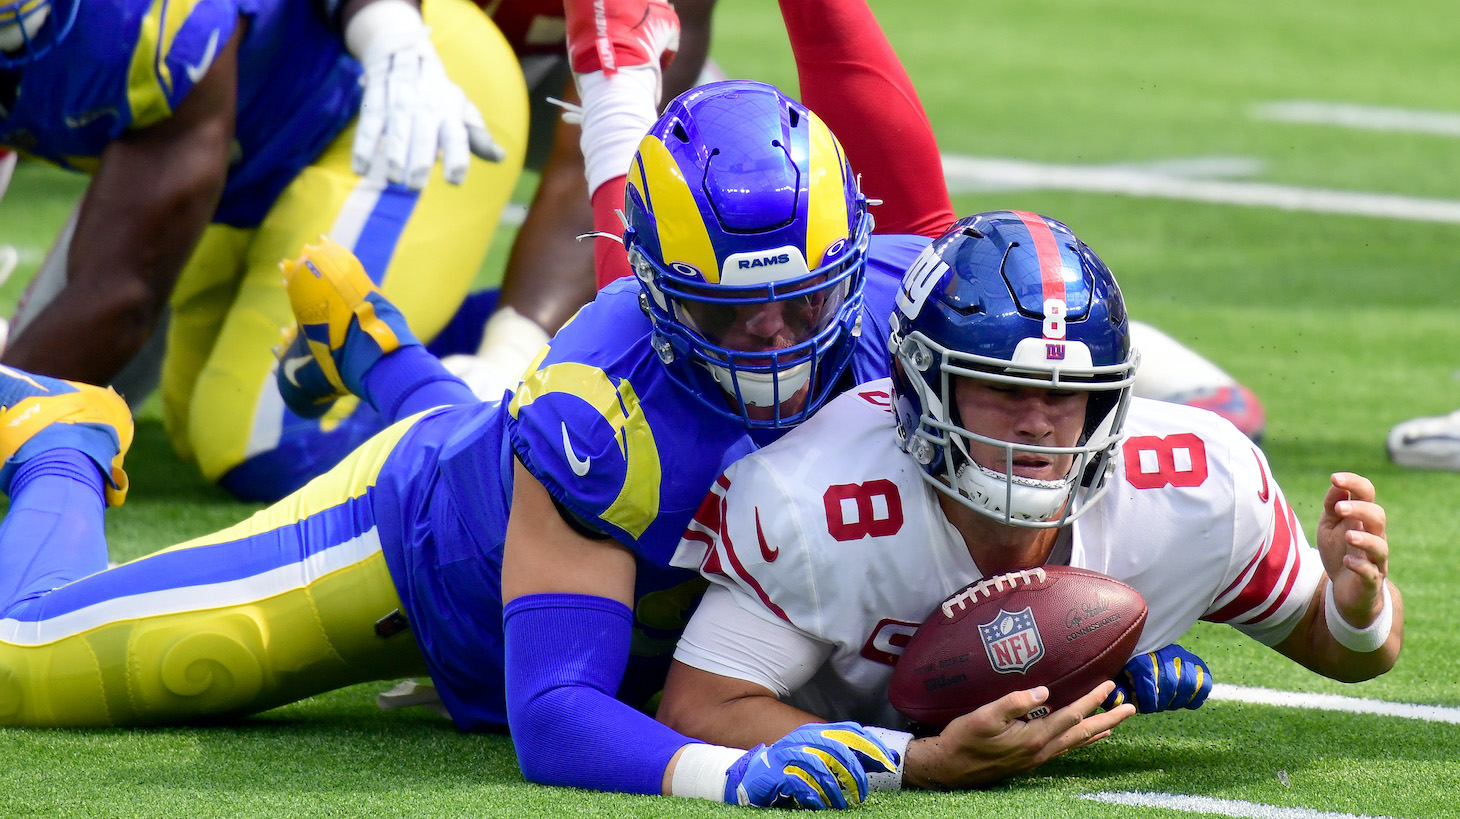 INGLEWOOD, CALIFORNIA - OCTOBER 04: Daniel Jones #8 of the New York Giants recovers his fumble as he is sacked by Morgan Fox #97 of the Los Angeles Rams during the first half at SoFi Stadium on October 04, 2020 in Inglewood, California. (Photo by Harry How/Getty Images)